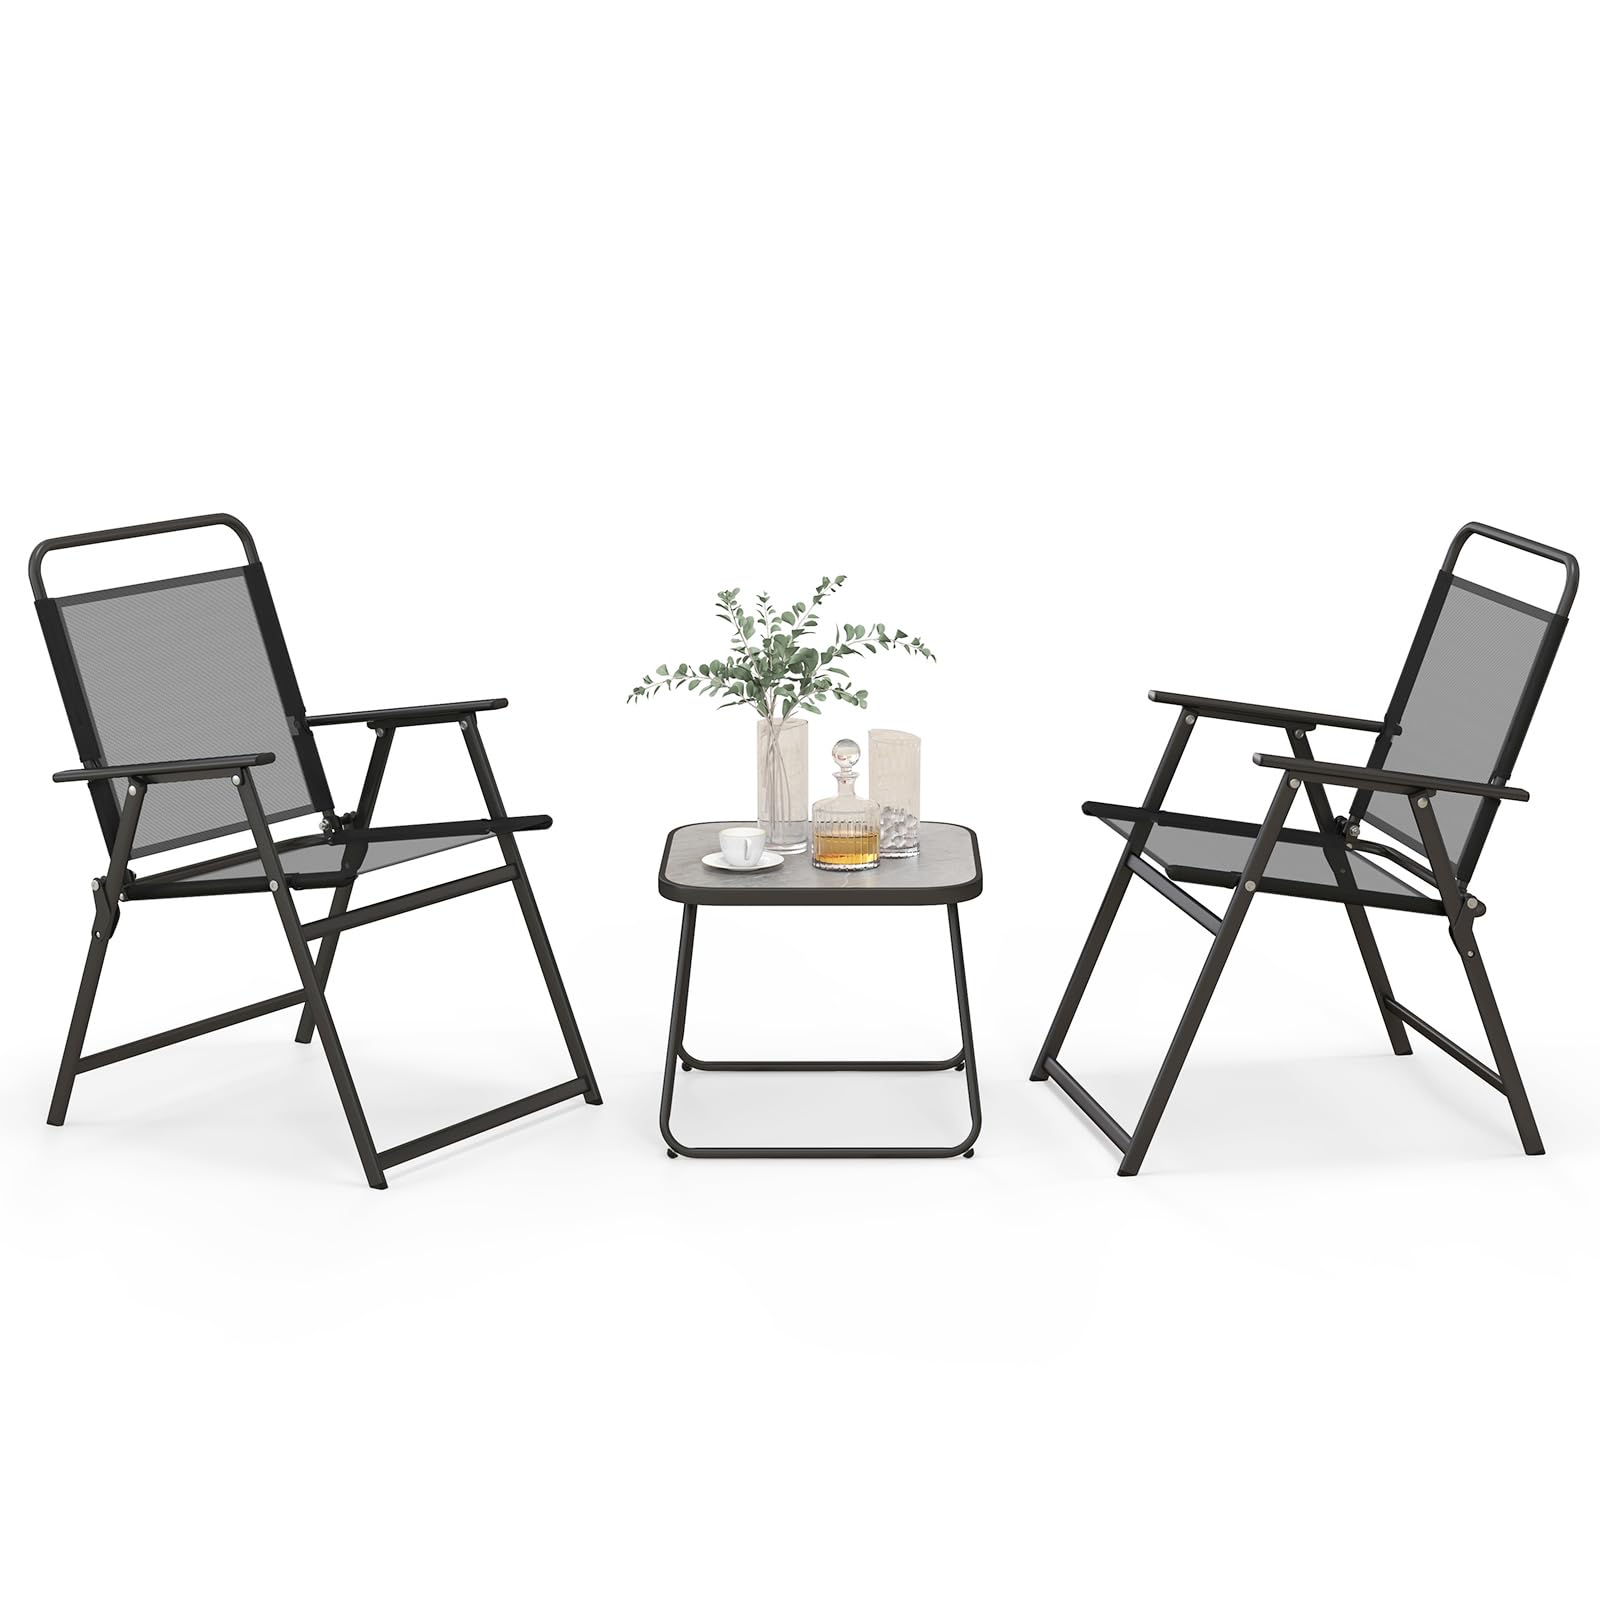 Giantex 3-Piece Patio Bistro Set, Outdoor Folding Chairs & Table Set, Outdoor Conversation Set for Balcony Yard Poolside